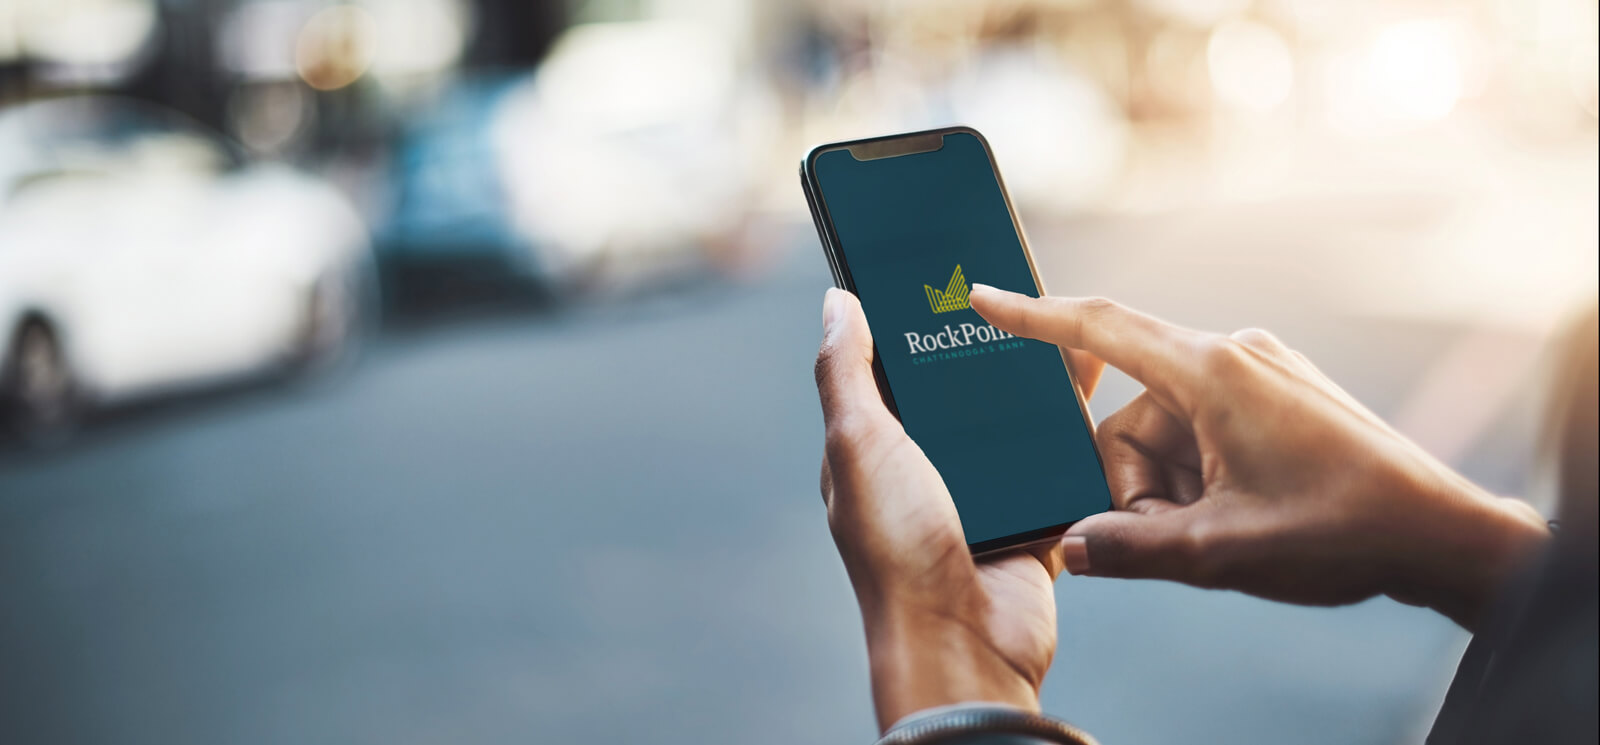 Rockpoint Bank logo on a phone